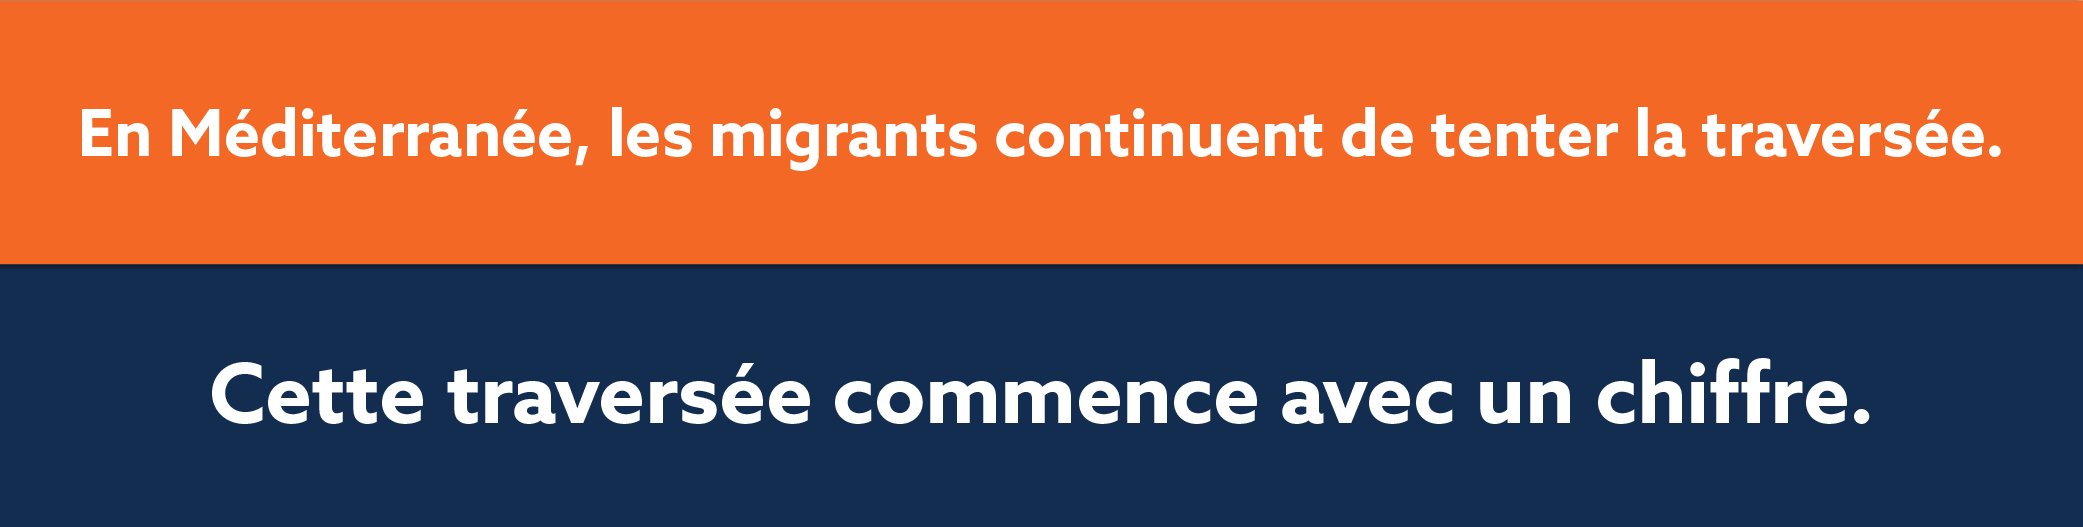 FRENCH_Migrants_Organized-01.png